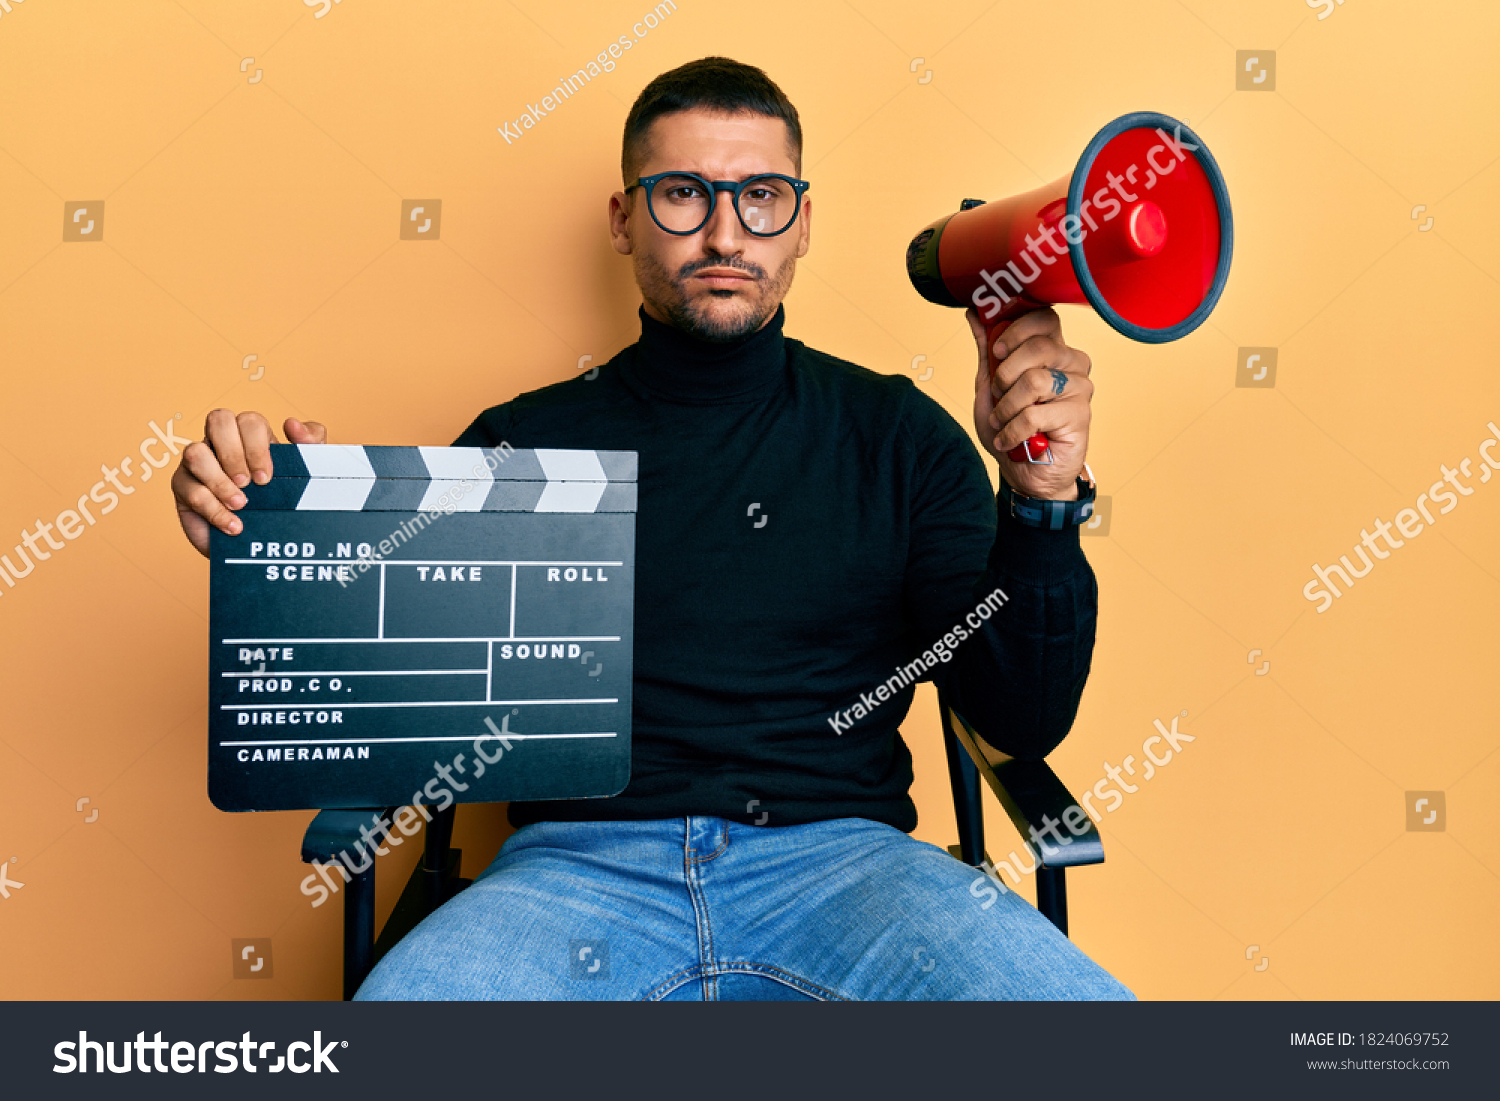 Handsome man with tattoos holding video film clapboard and megaphone skeptic and nervous, frowning upset because of problem. negative person.  #1824069752